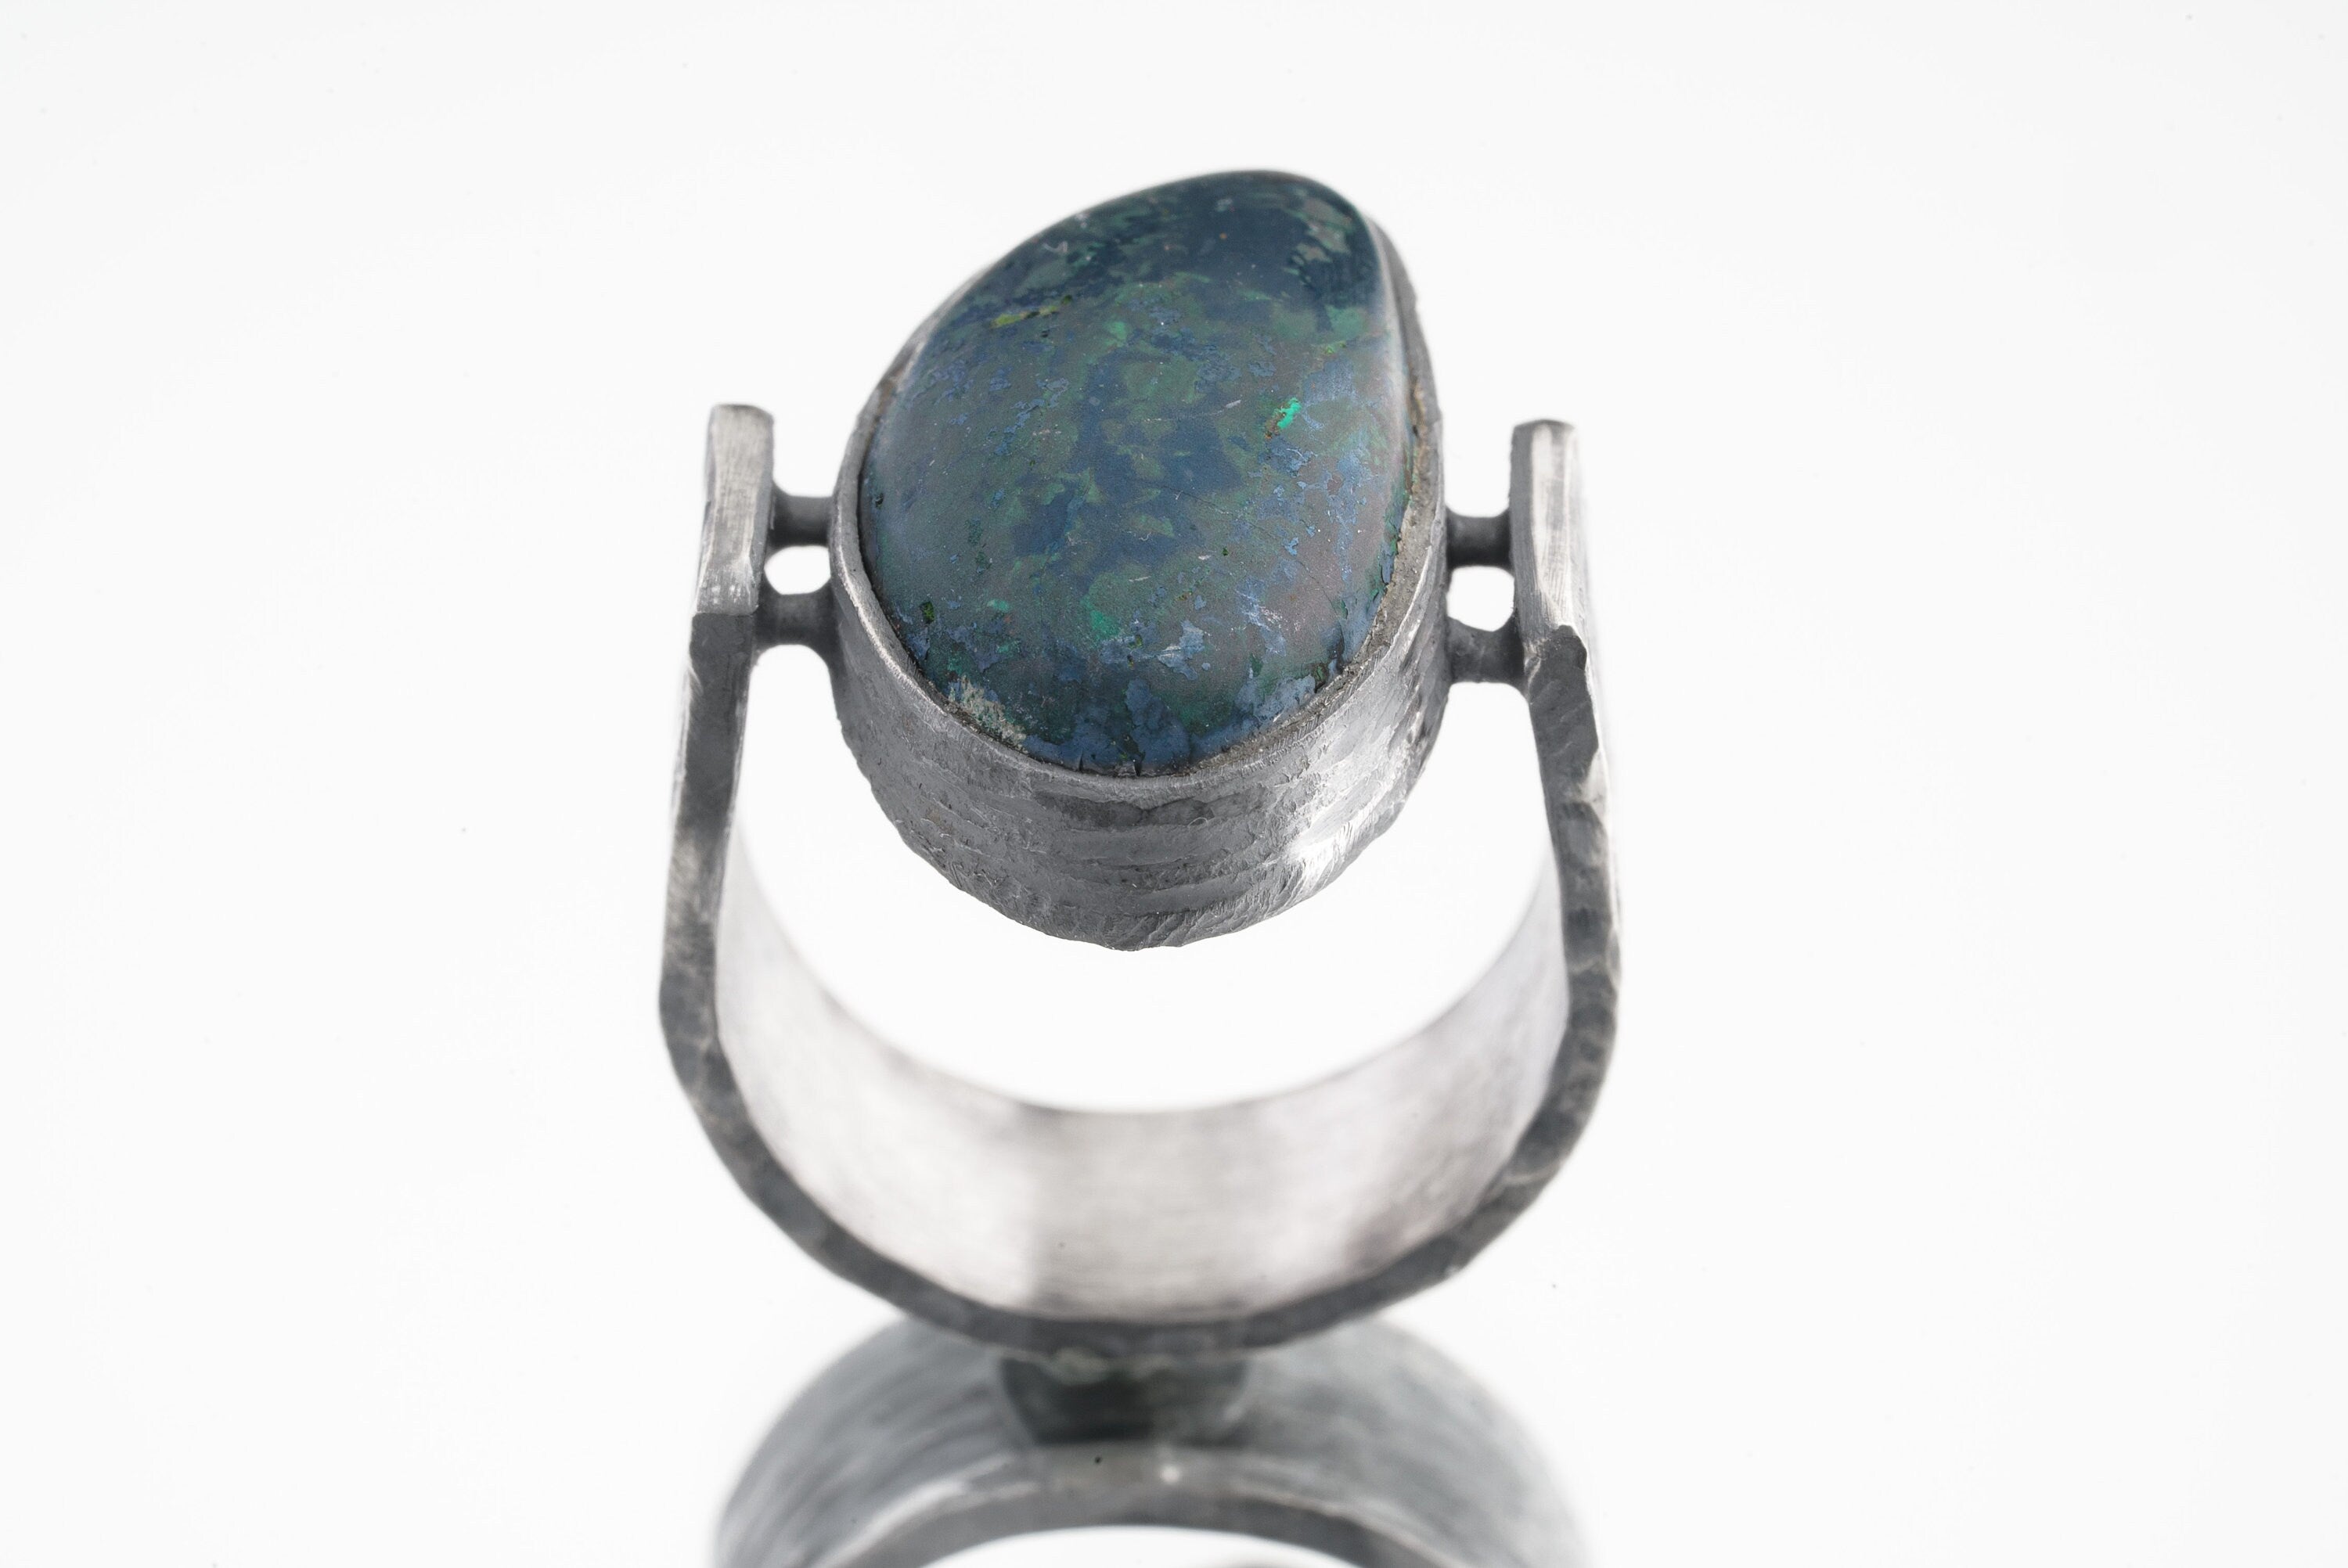 Australian Chrysoprase Cabochon - Rustic Comfortable Crystal Ring - Size 8 1/2 US - 925 Sterling Silver - Abstract Textured & Oxidised